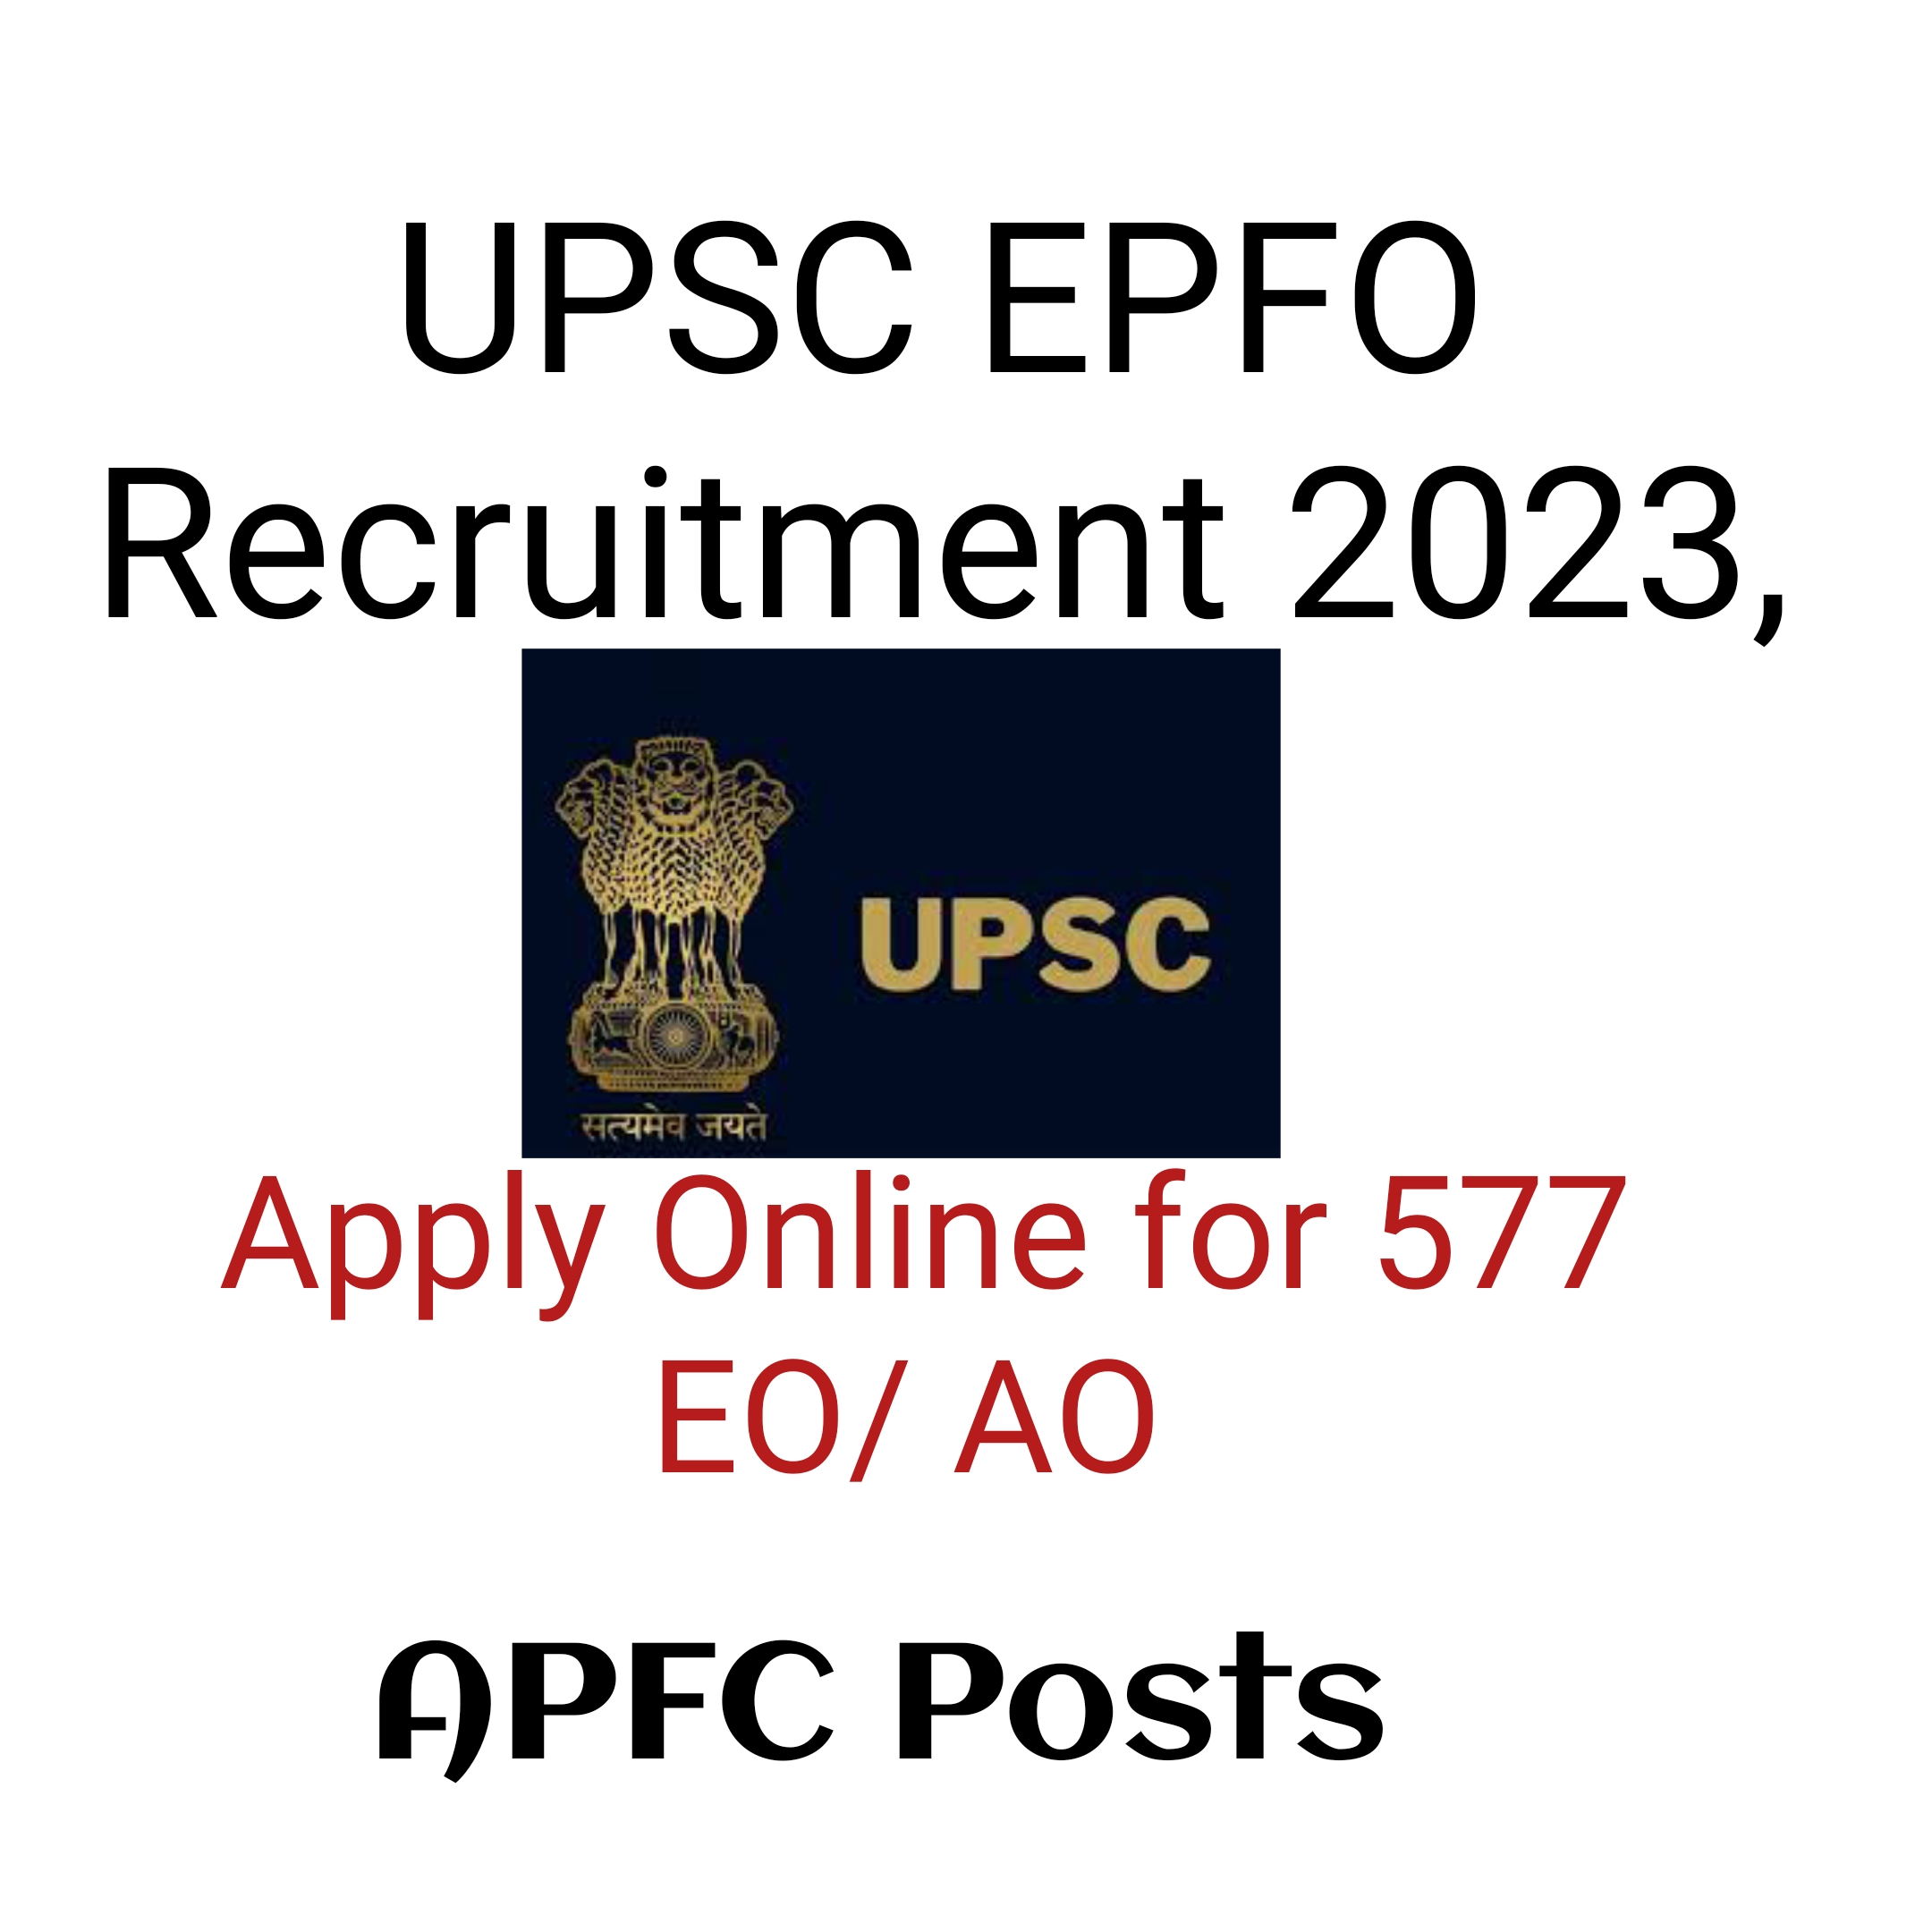 UPSC EPFO Recruitment 2023, Apply Online for 577 EO/ AO and APFC Posts